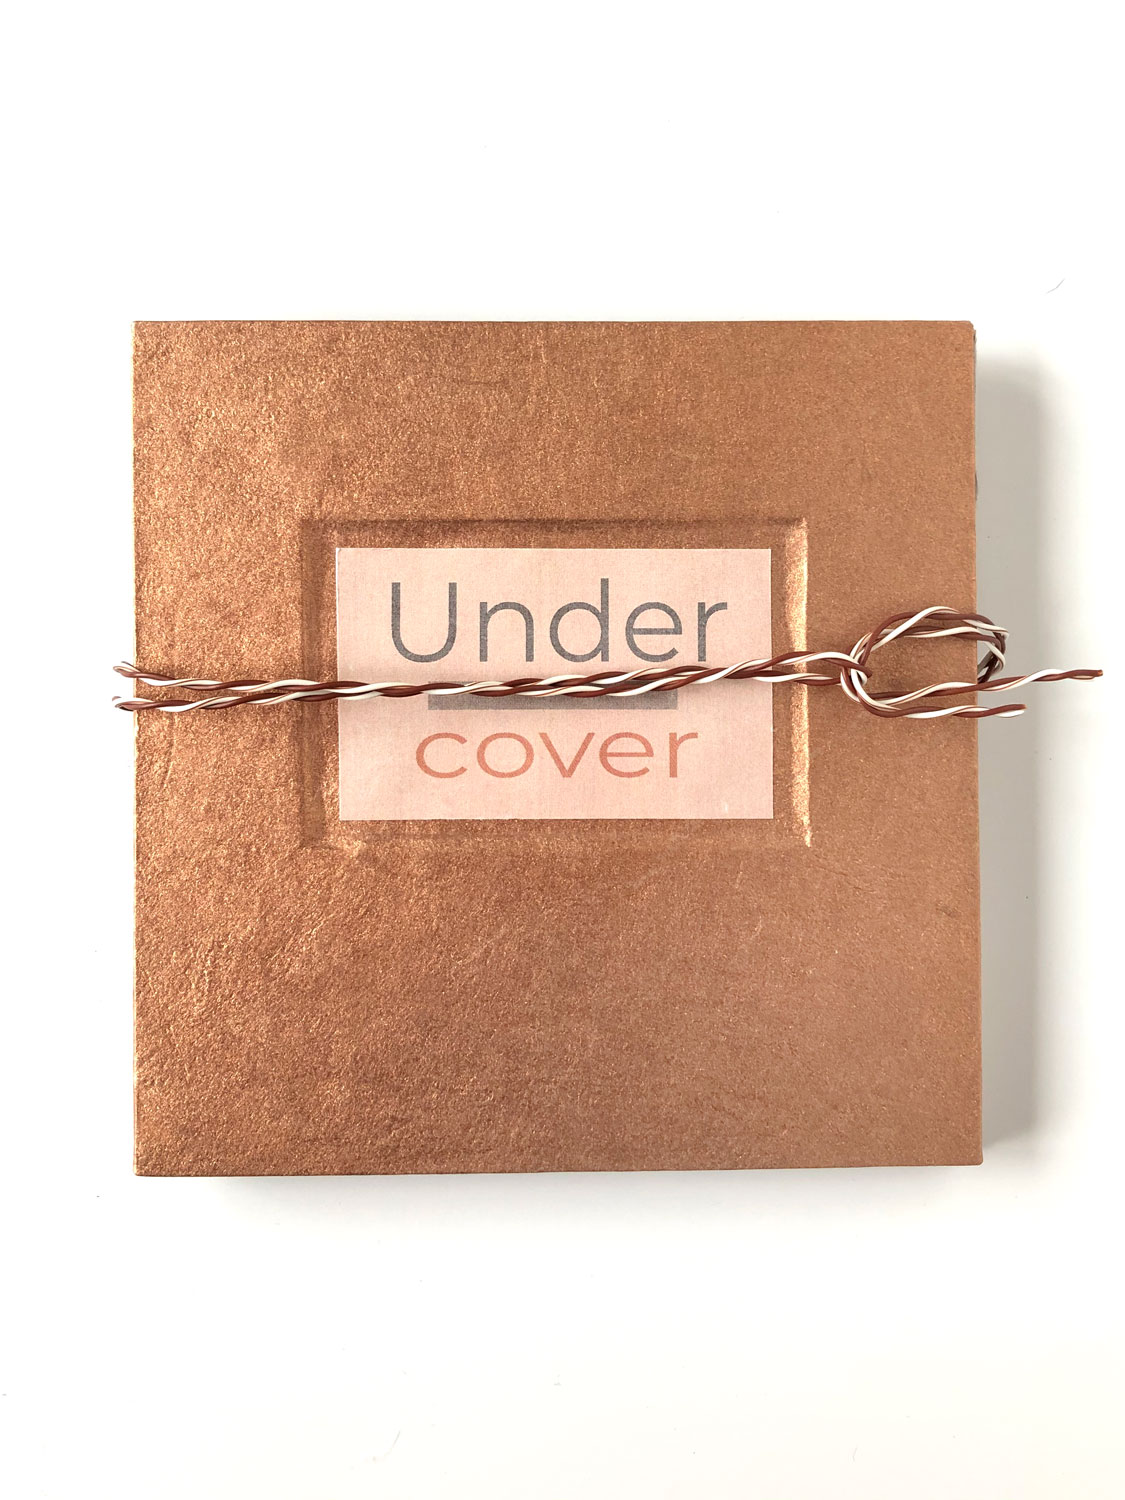 Under (Cover)